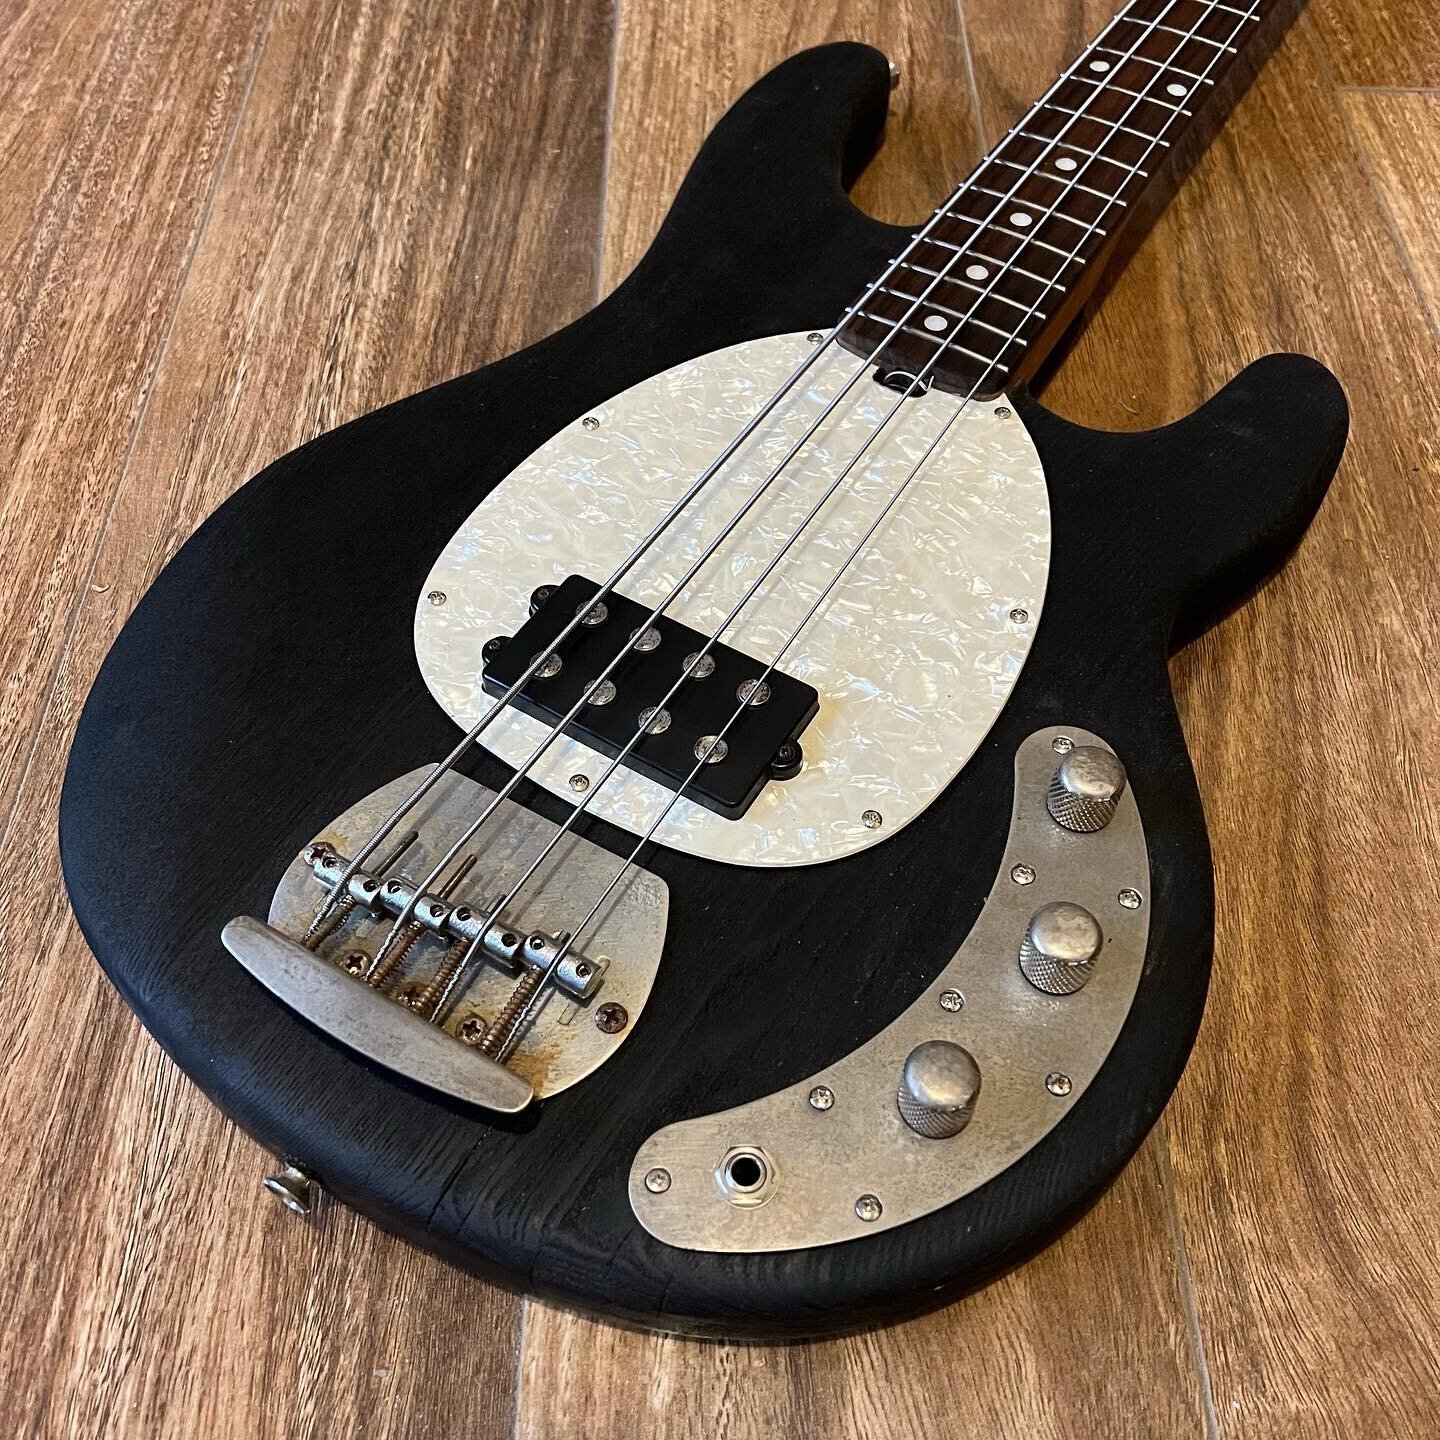 A little while ago the flood hit this bass in her own home, despite being almost 5 metres above the ground level. The owner had just bought the house&hellip; the guitar were brought by a friend to see what could be salvaged. Today she came to pick it